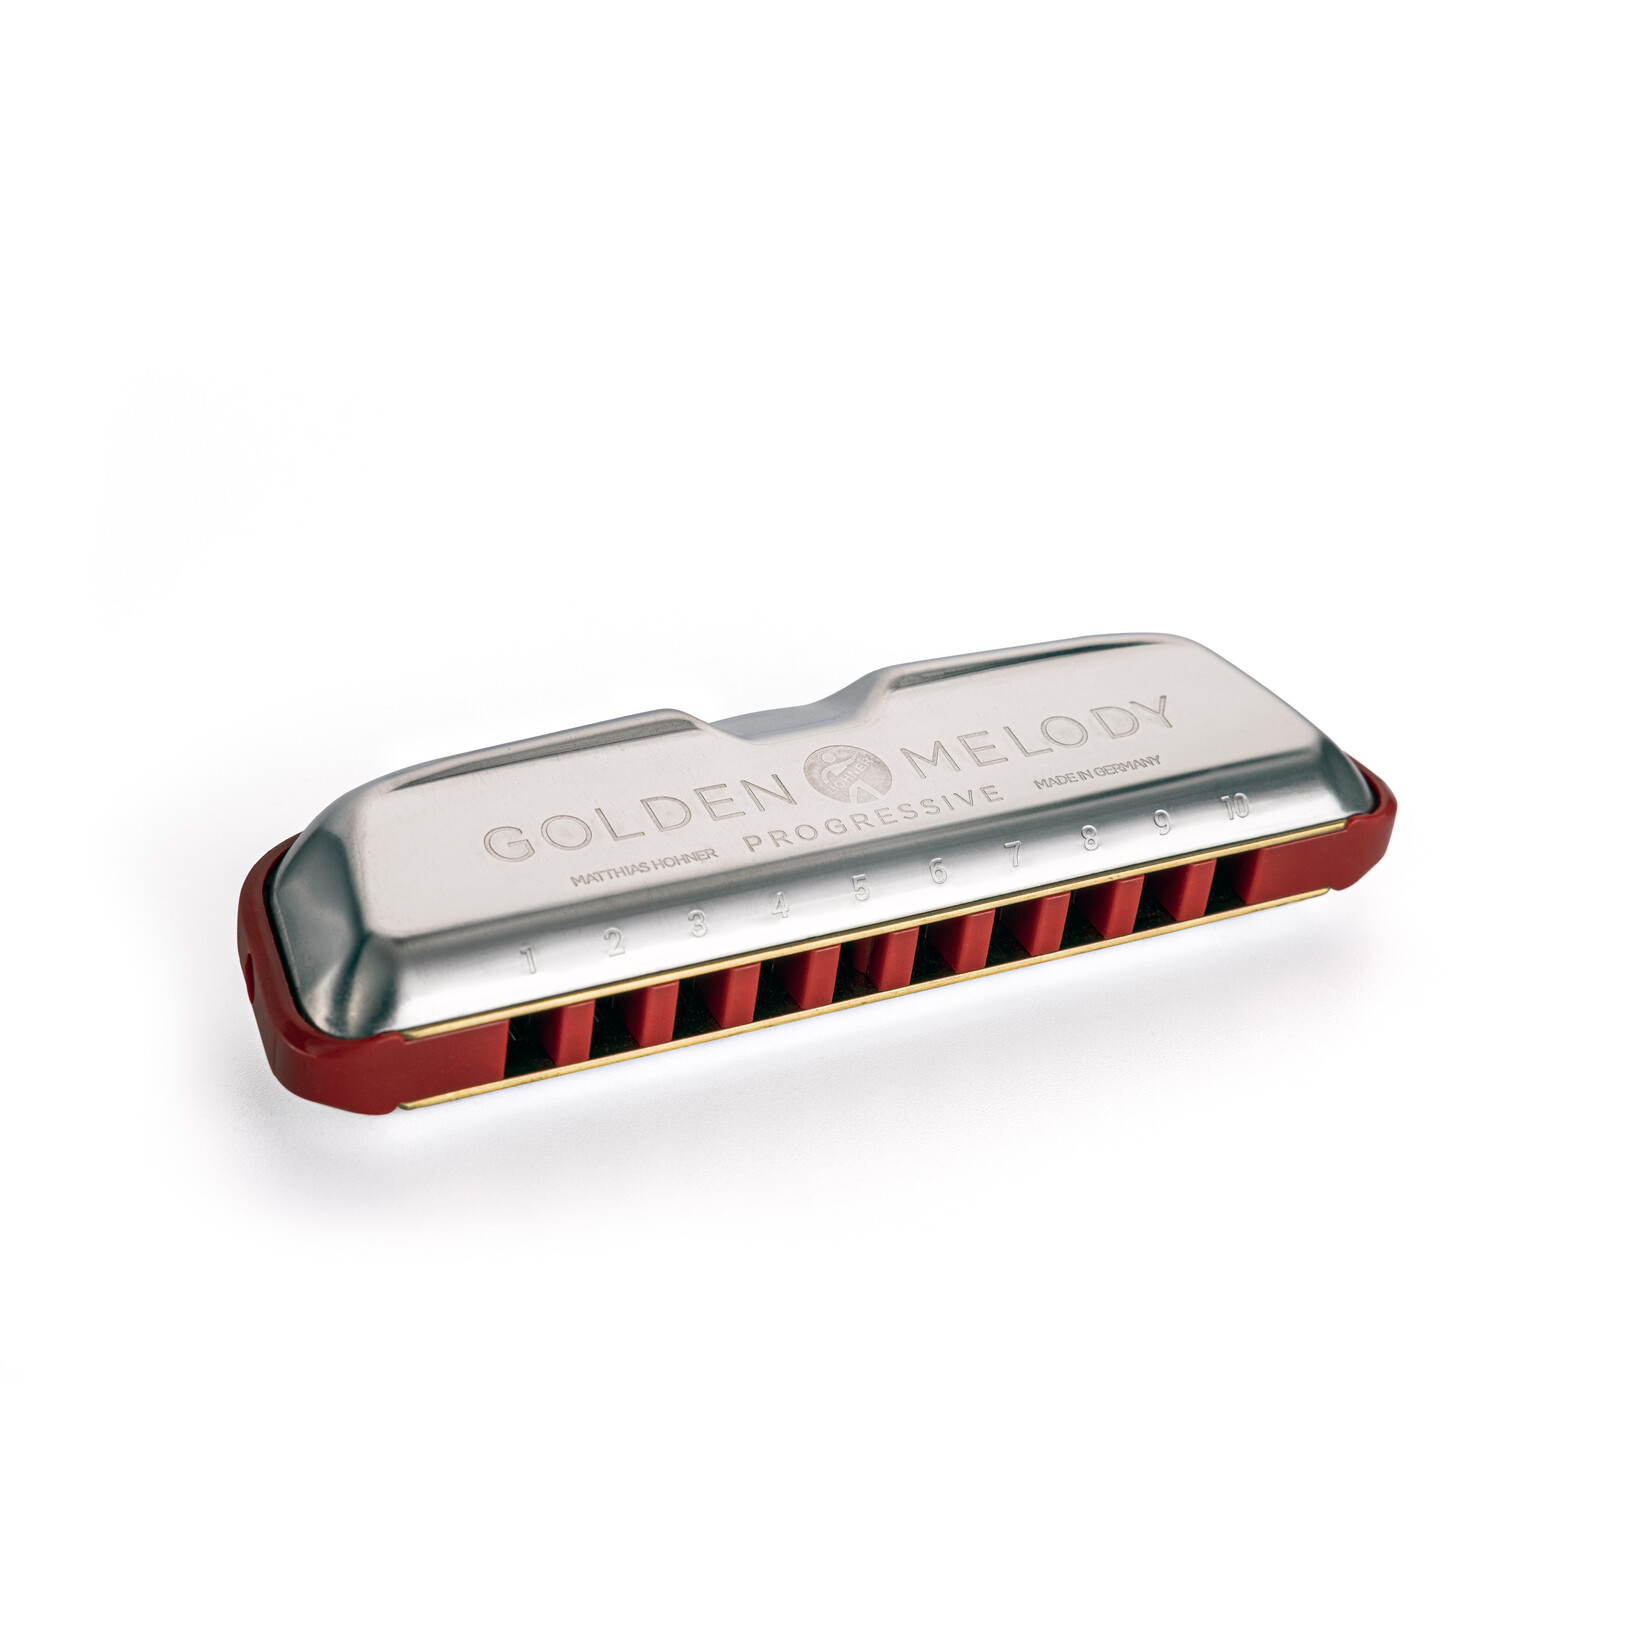 Hohner Golden Melody Harmonica Key of D